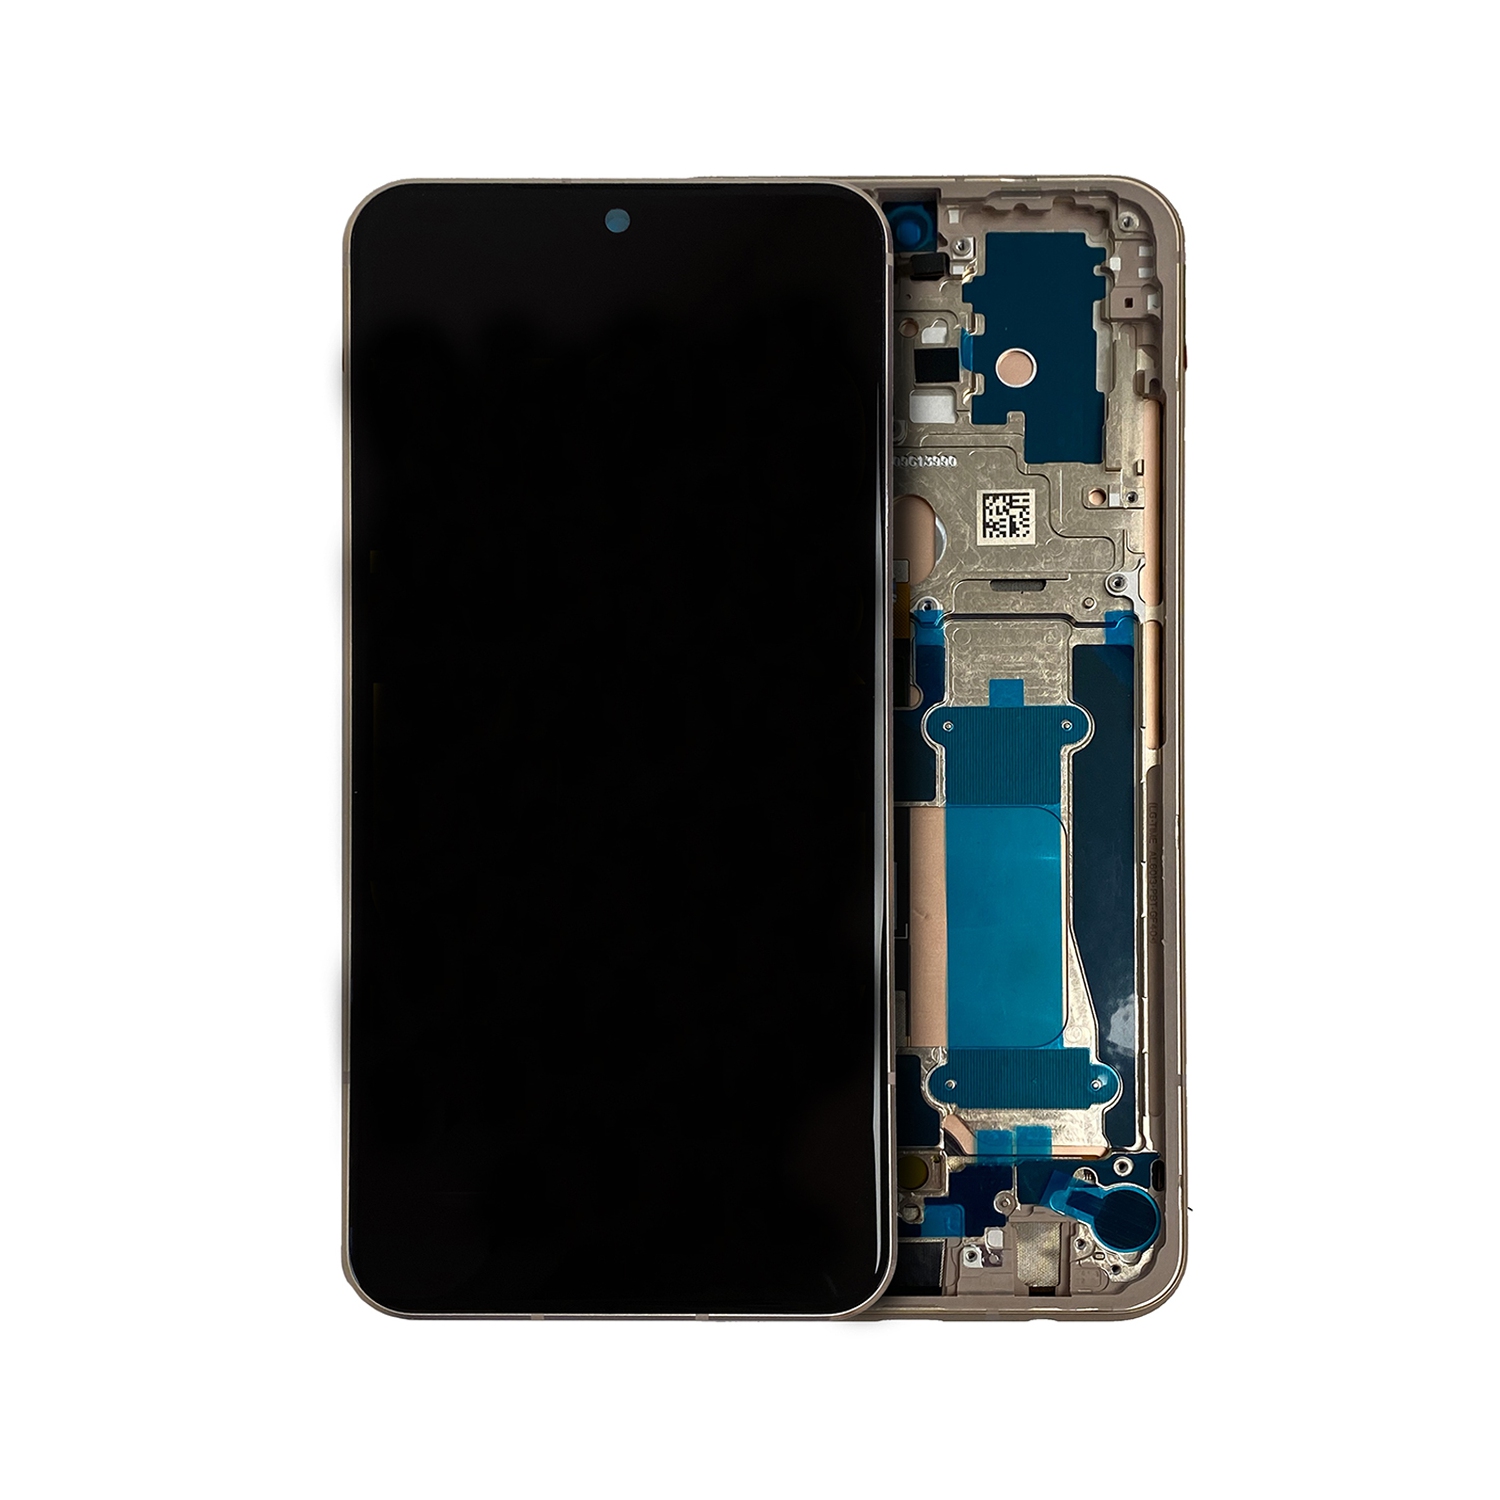 Refurbished (Excellent) - Replacement OLED Display Touch Screen Digitizer Assembly With Frame For LG V60 ThinQ 5G - Classy Gold